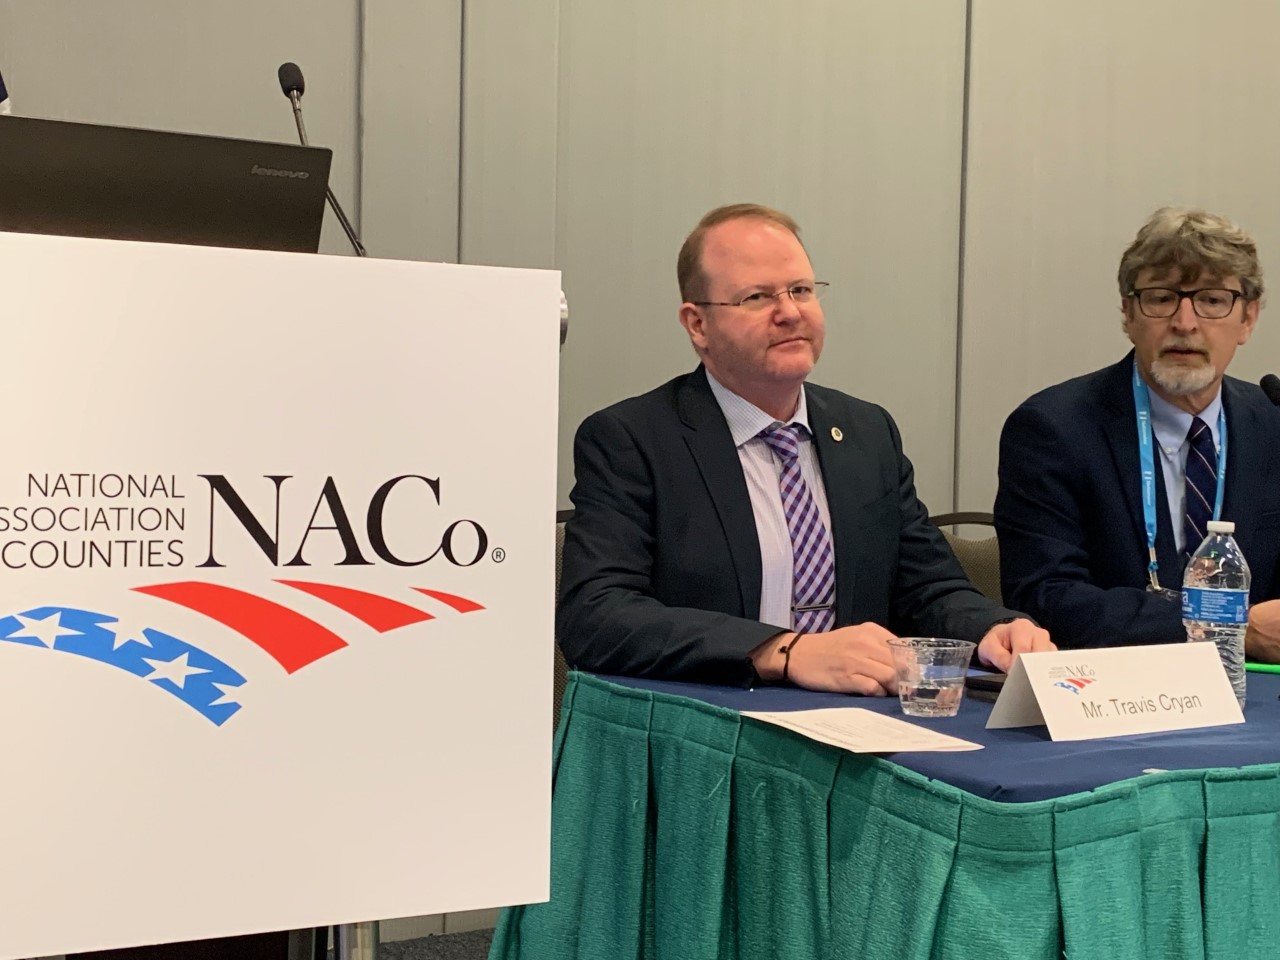 Community Resilience Panel at NACO